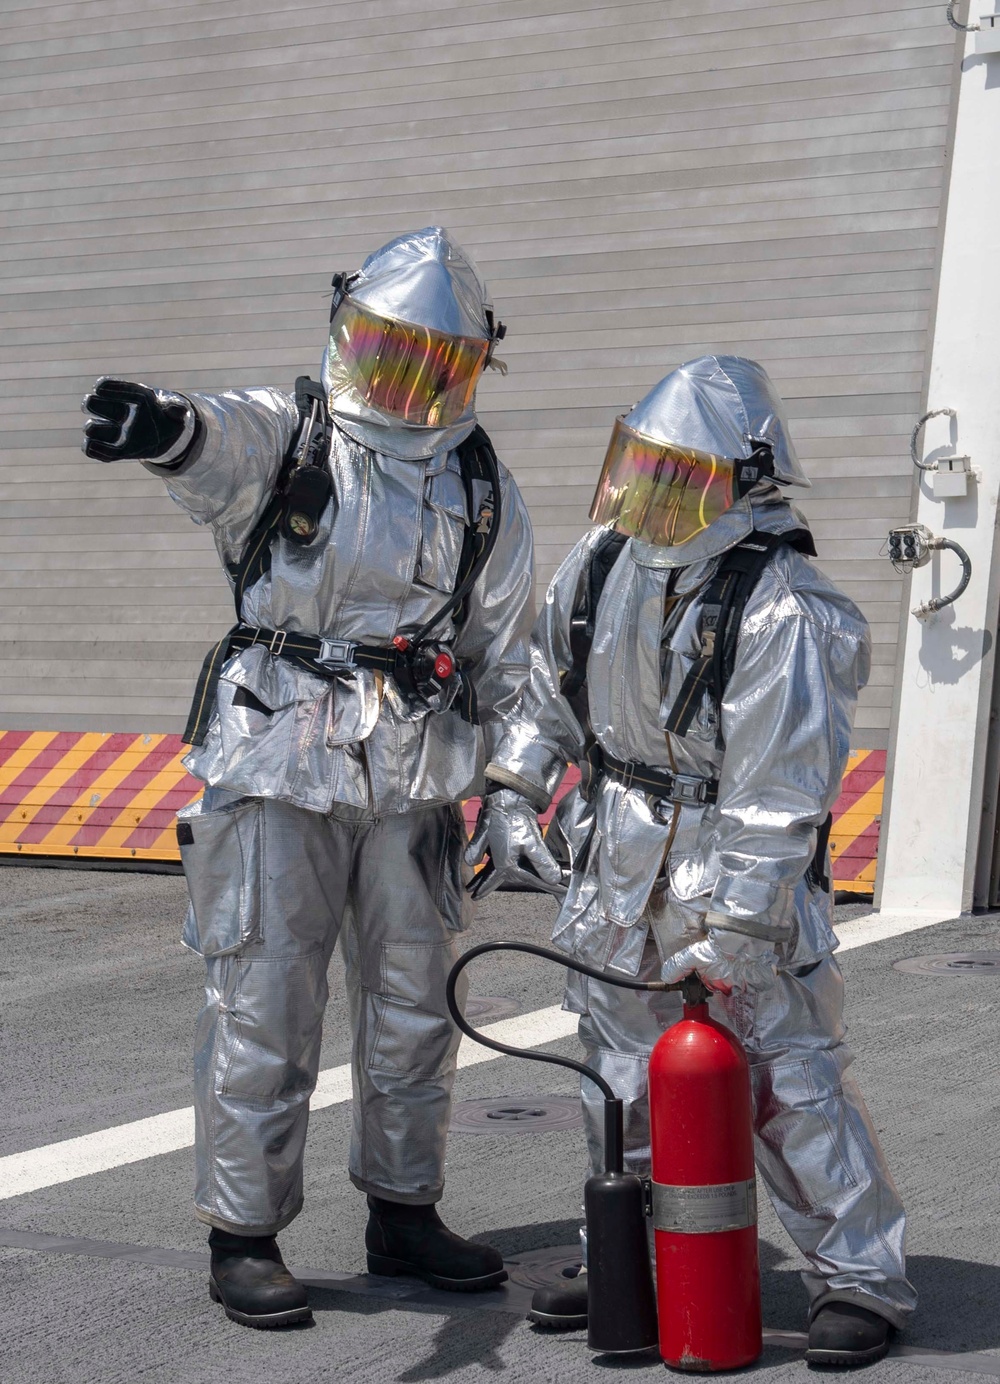 USS Jackson (LCS 6) Sailors stand reflash watch during firefighting drill